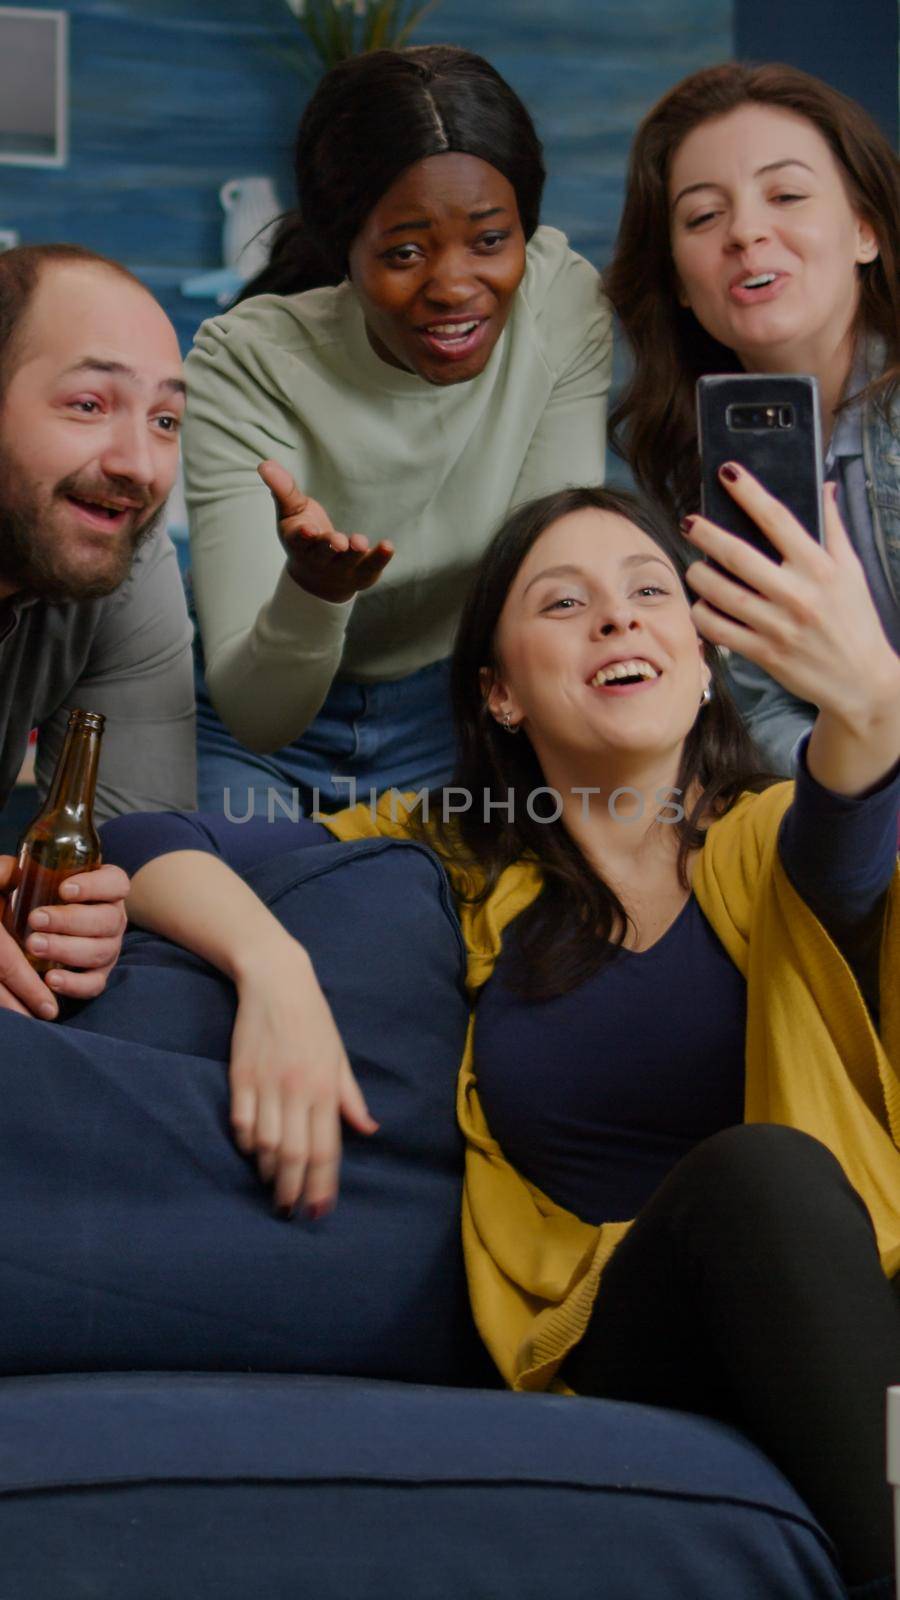 Multiracial friends speaking with collegue man during video call conference by DCStudio